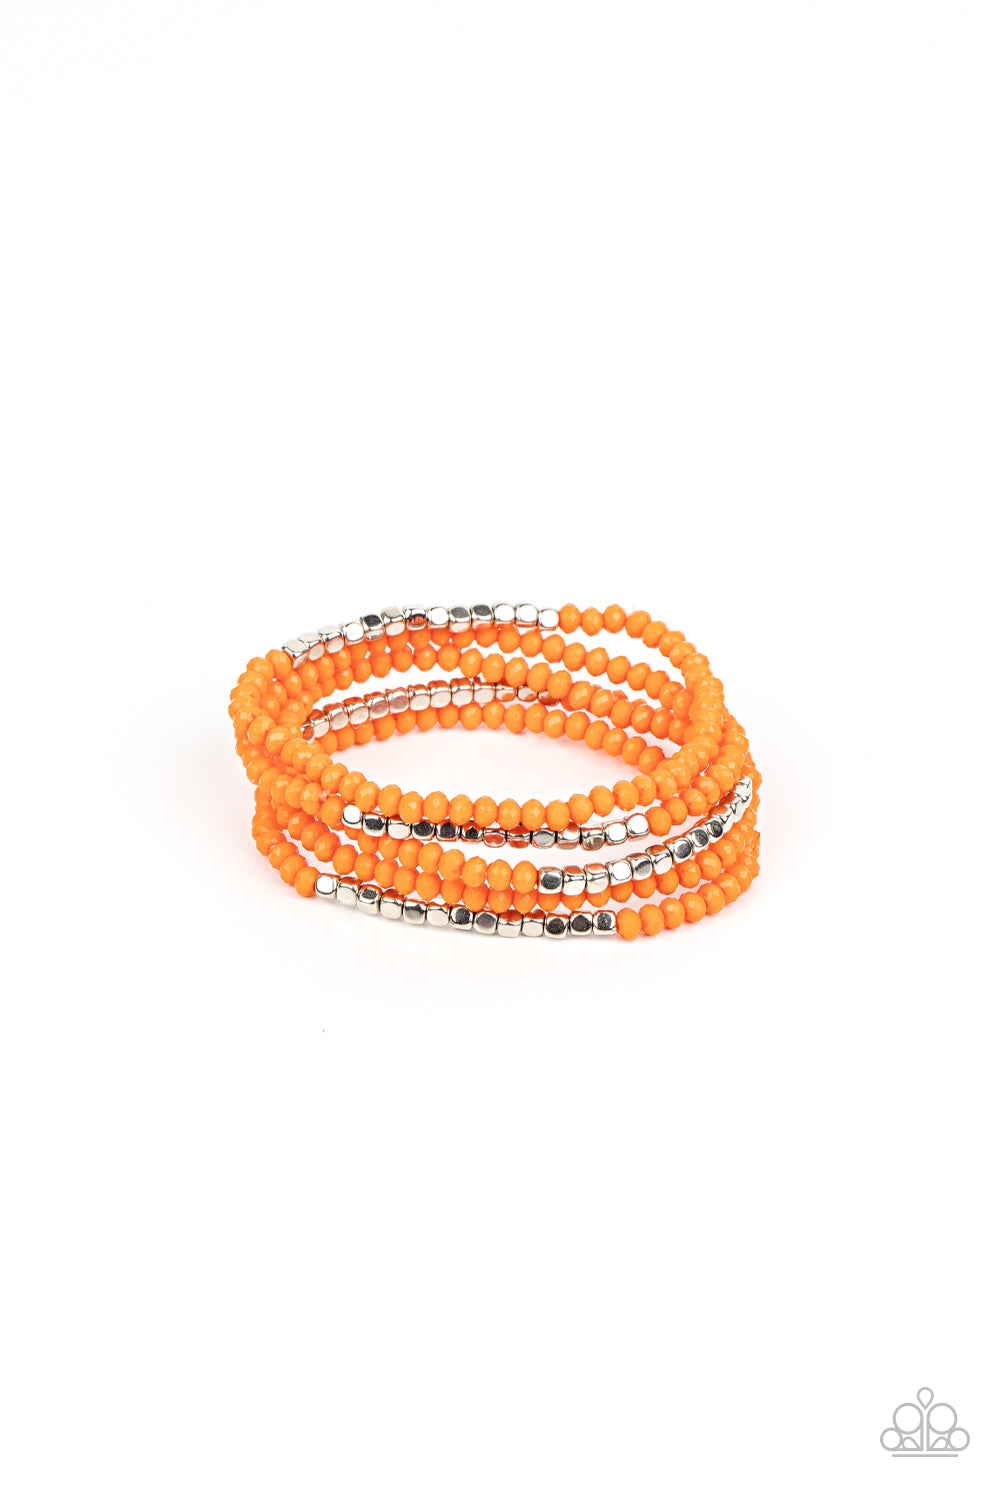 Tulum Trek - Orange and Silver Fashion Bracelets - Paparazzi Accessories - Infused with sections of shiny silver cube beads, a flamboyant collection of faceted orange beads are threaded along stretchy bands around the wrist for a vivacious pop of color. Sold as one set of five bracelets.